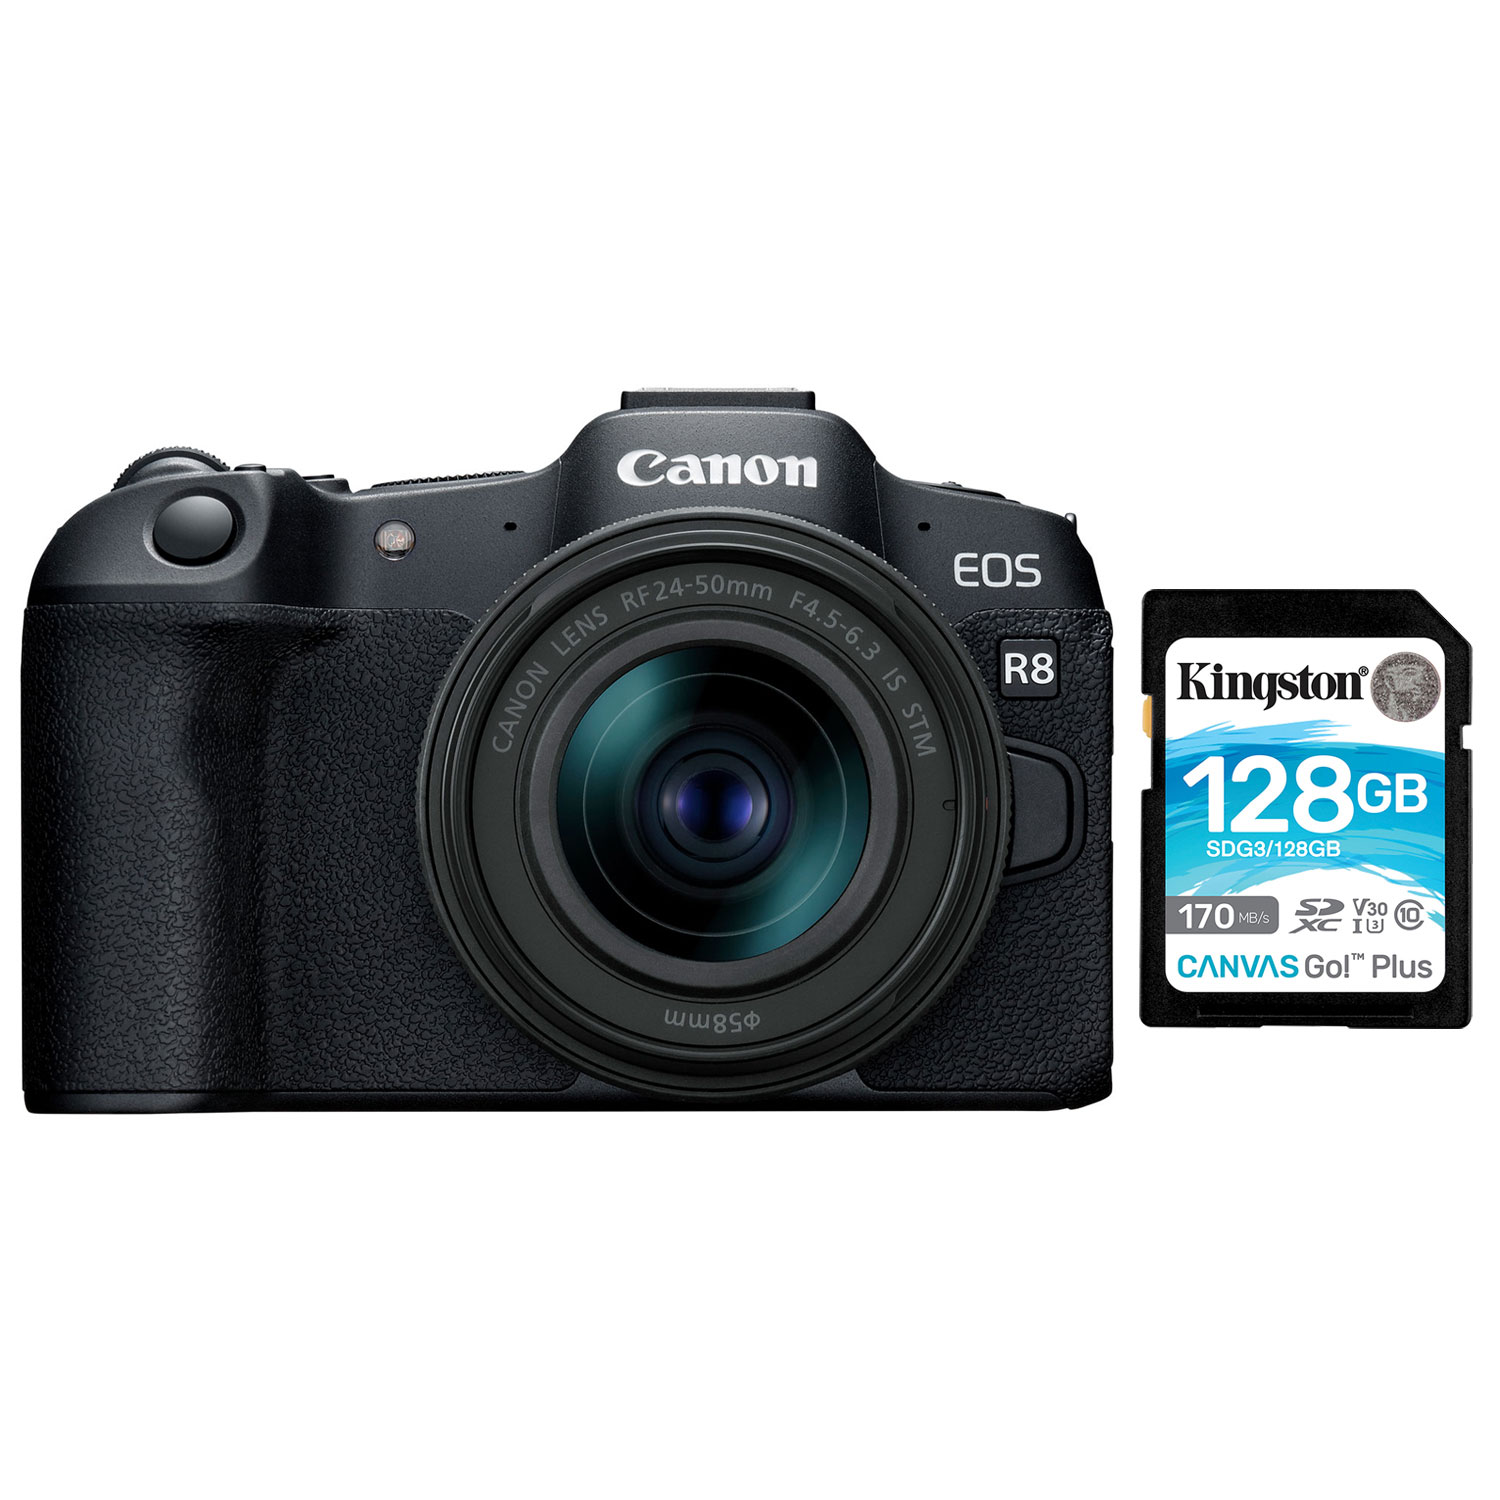 Canon EOS R8 Mirrorless Camera with 24-50mm IS STM Lens Kit & 128GB 170MB/s SDXC Memory Card